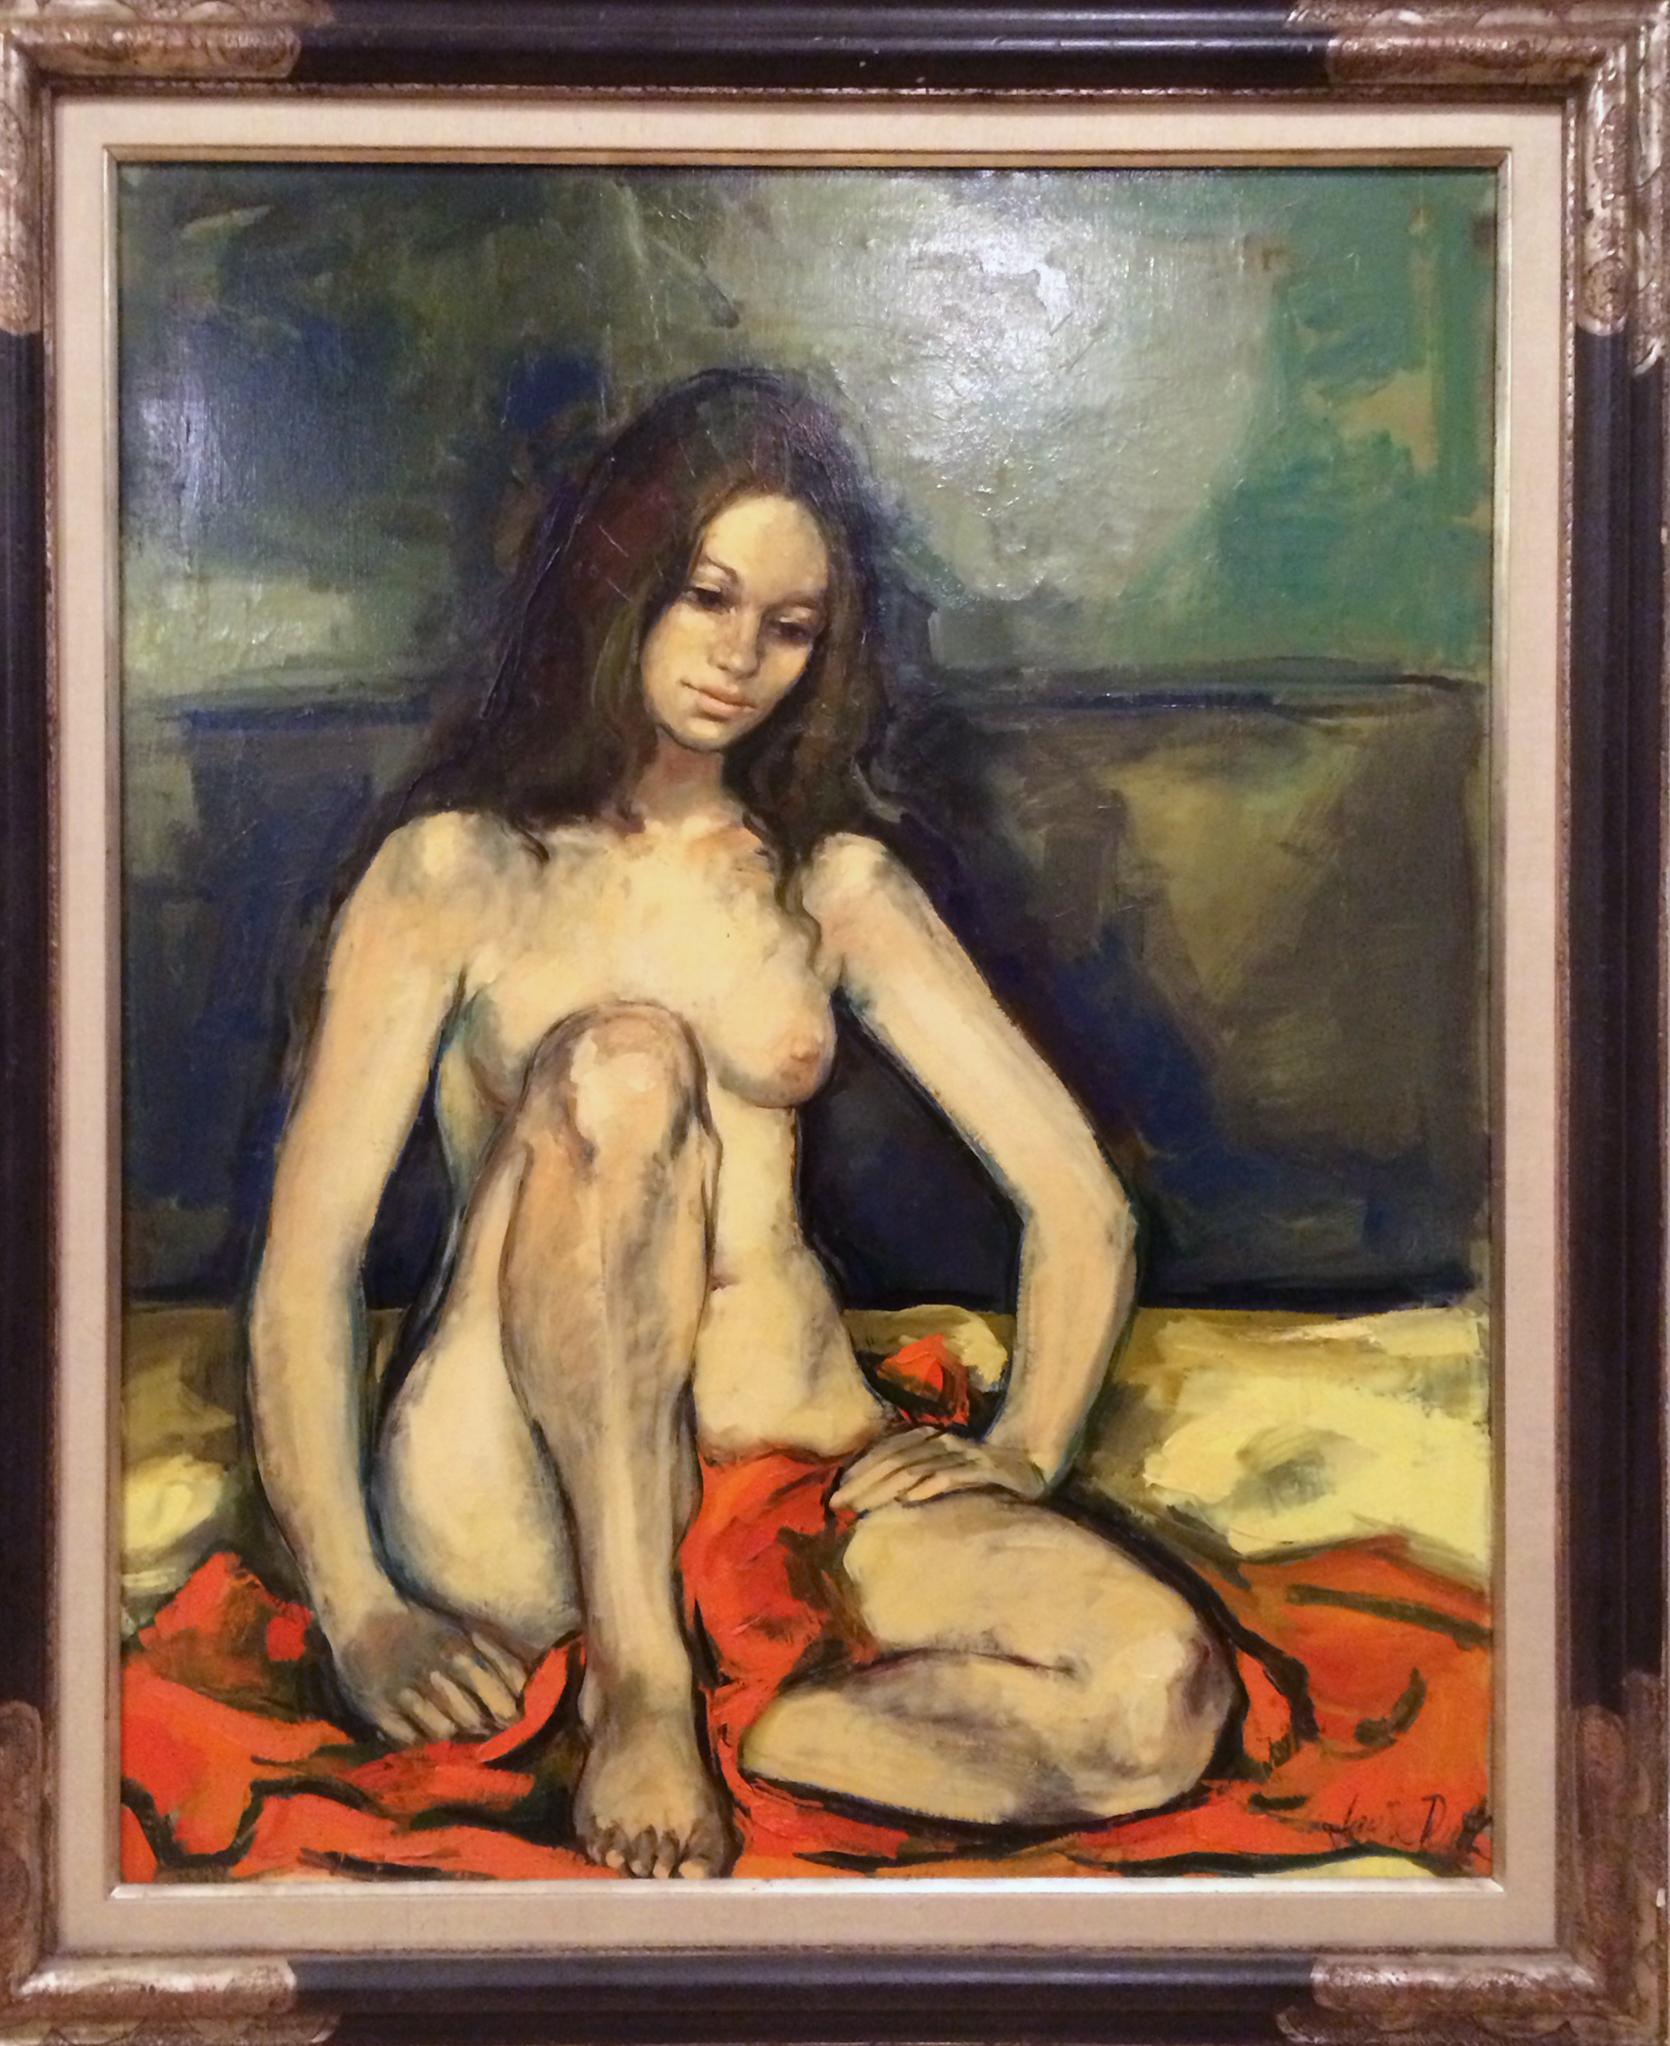 Seated Nude with Orange Blanket, Oil Painting by Jan de Ruth